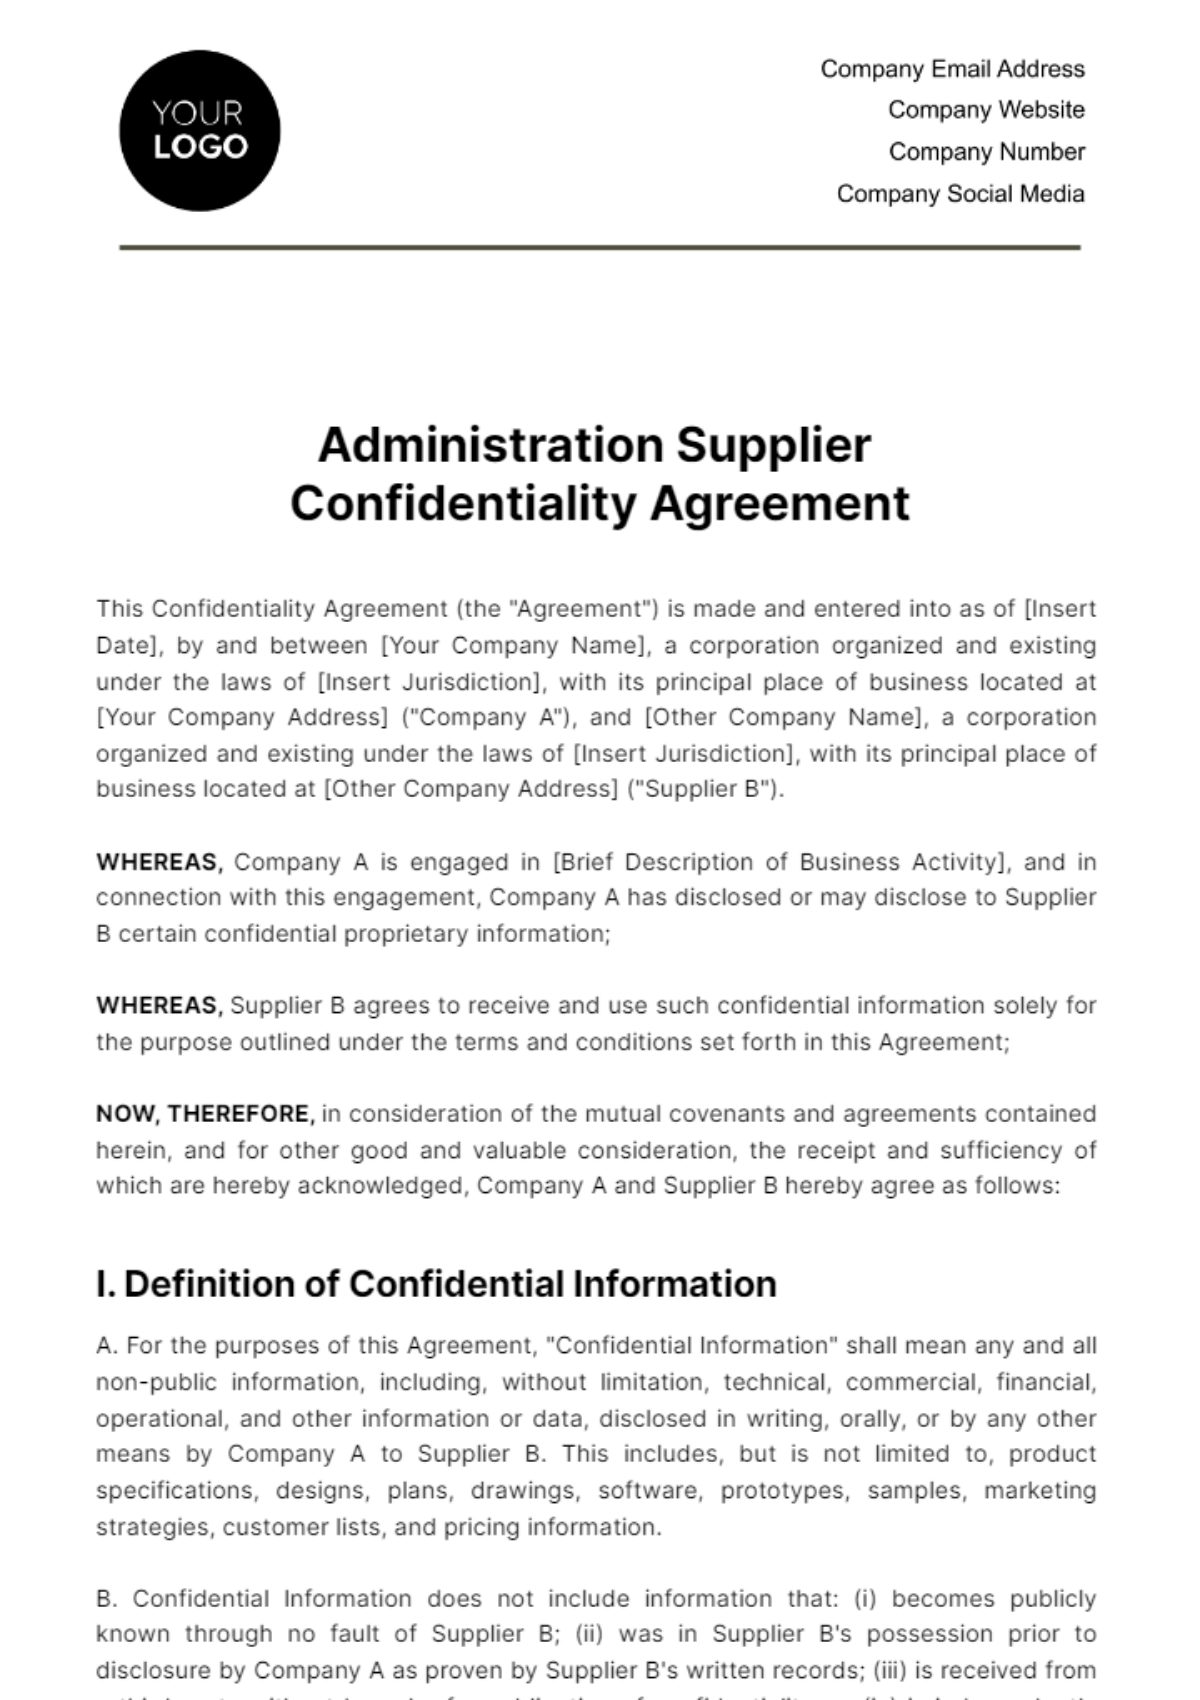 Free Administration Supplier Confidentiality Agreement Template